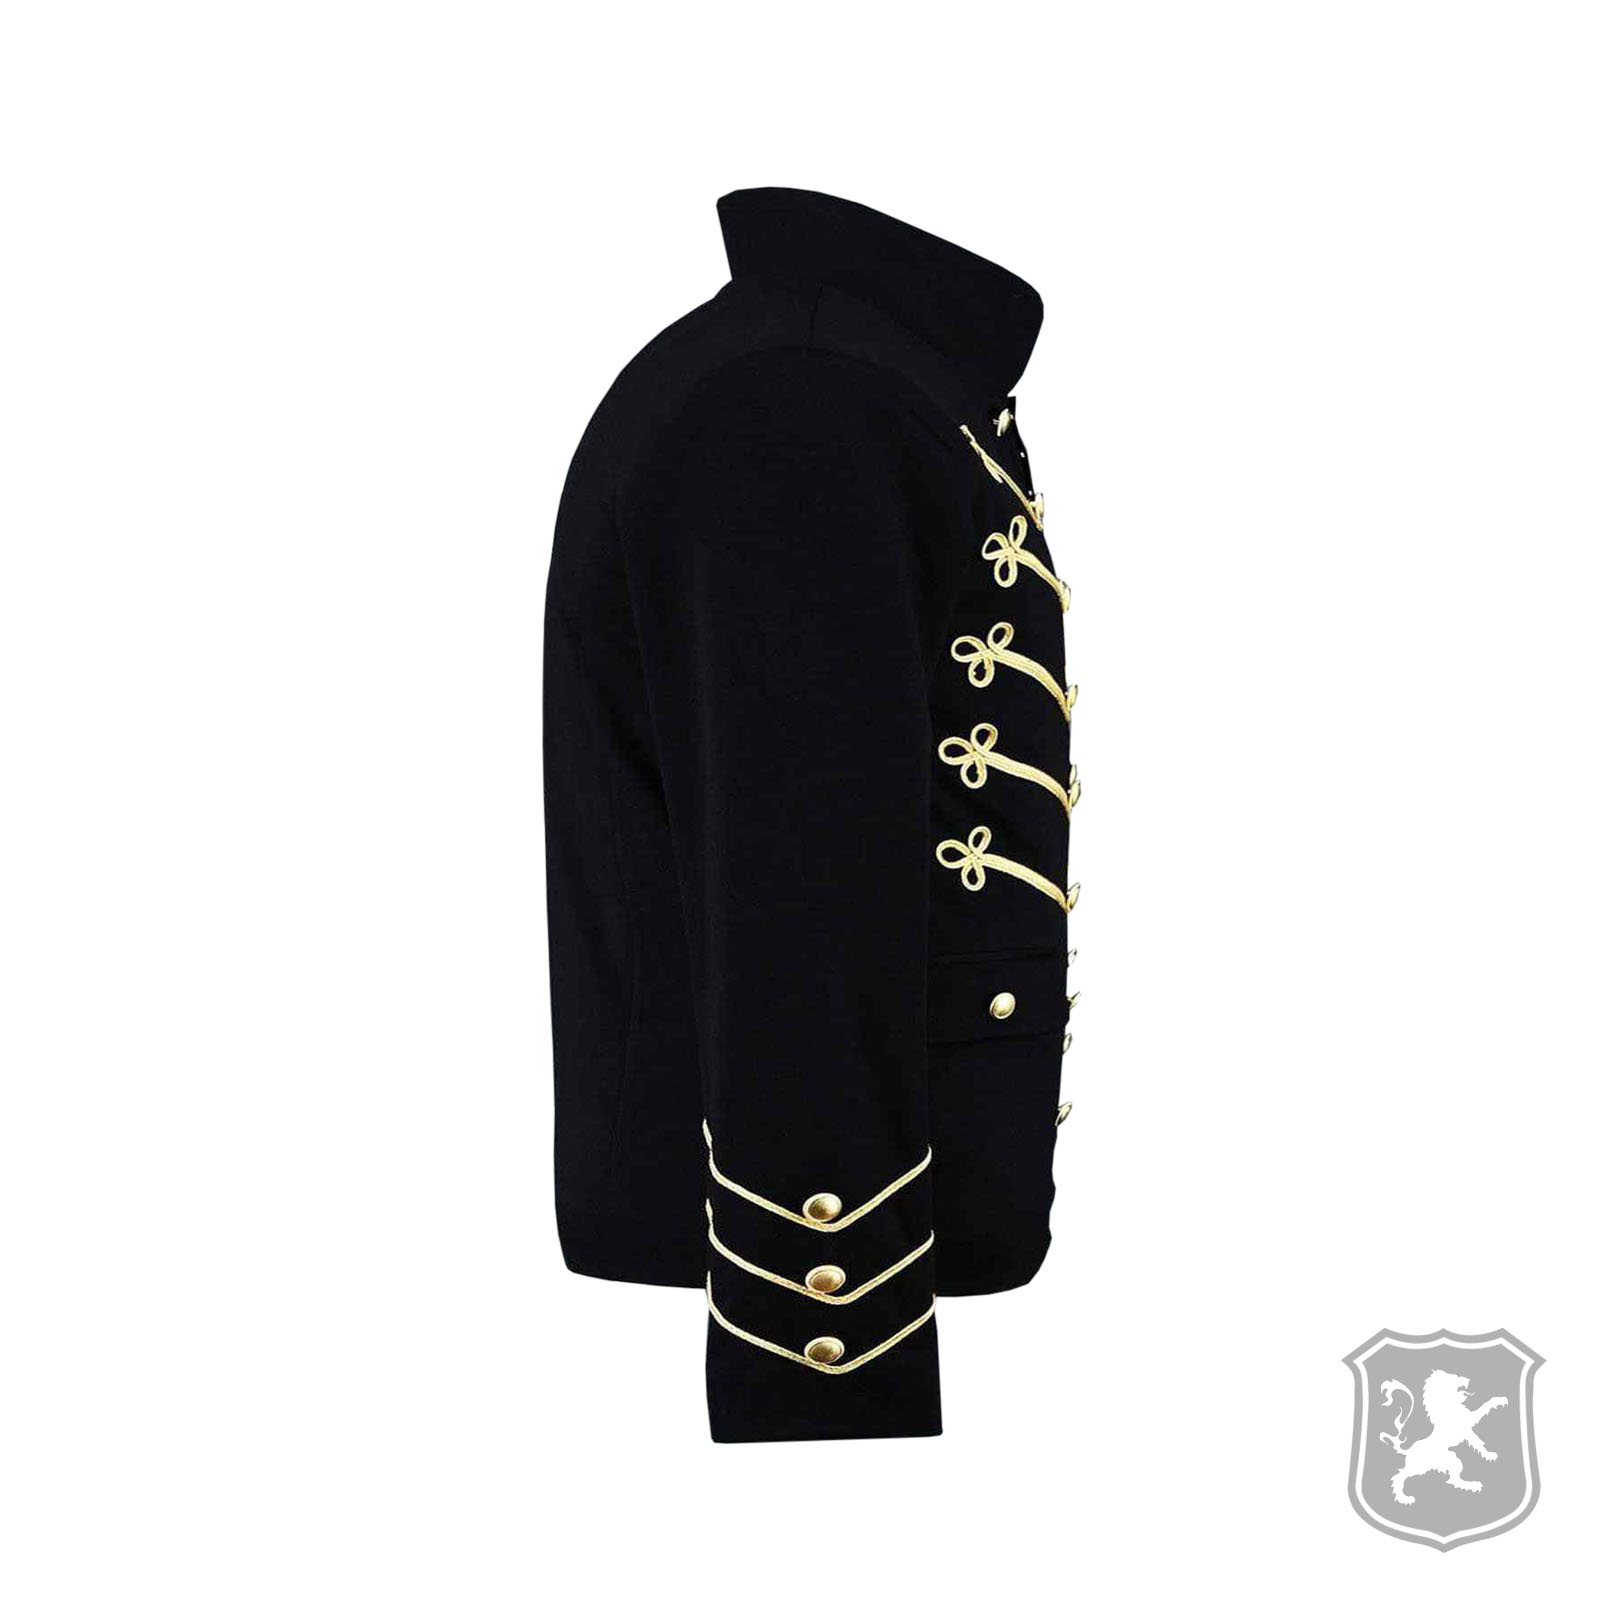 Black Military Jacket With Gold Embroidery Kilt Zone | lupon.gov.ph